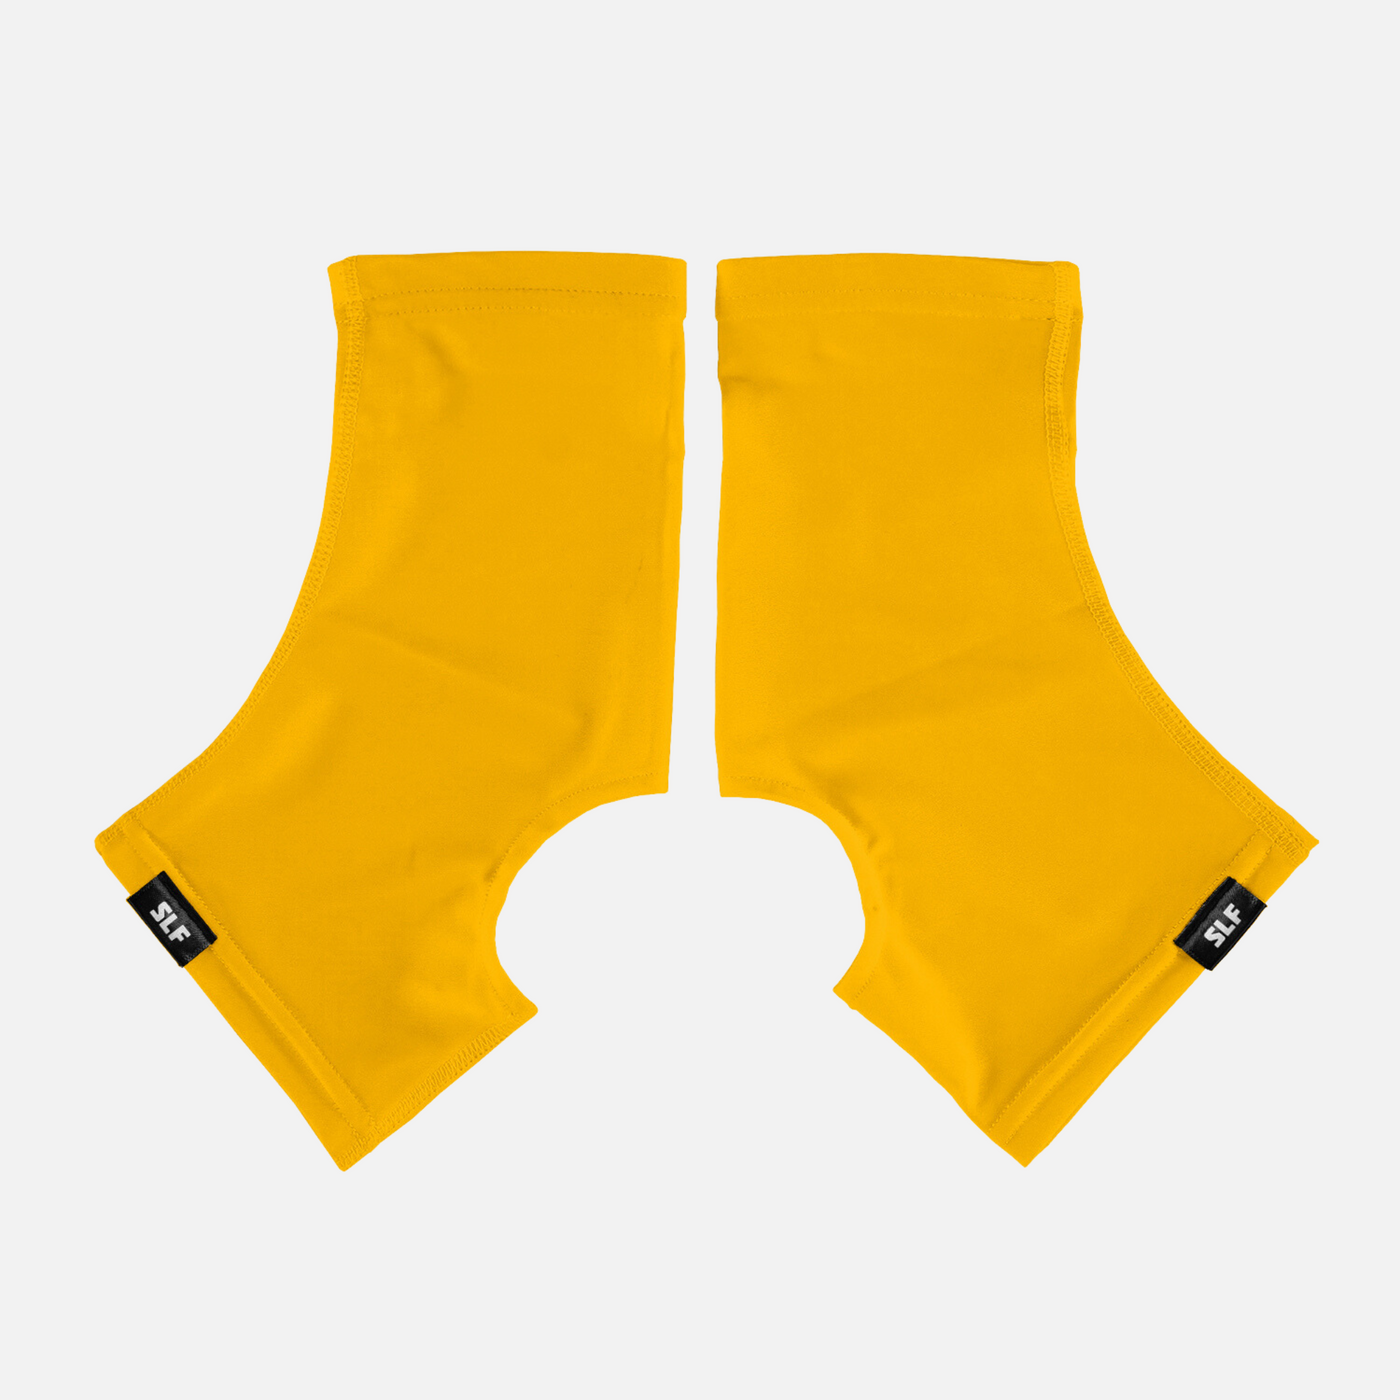 Hue Yellow Gold Kids Spats / Cleat Covers